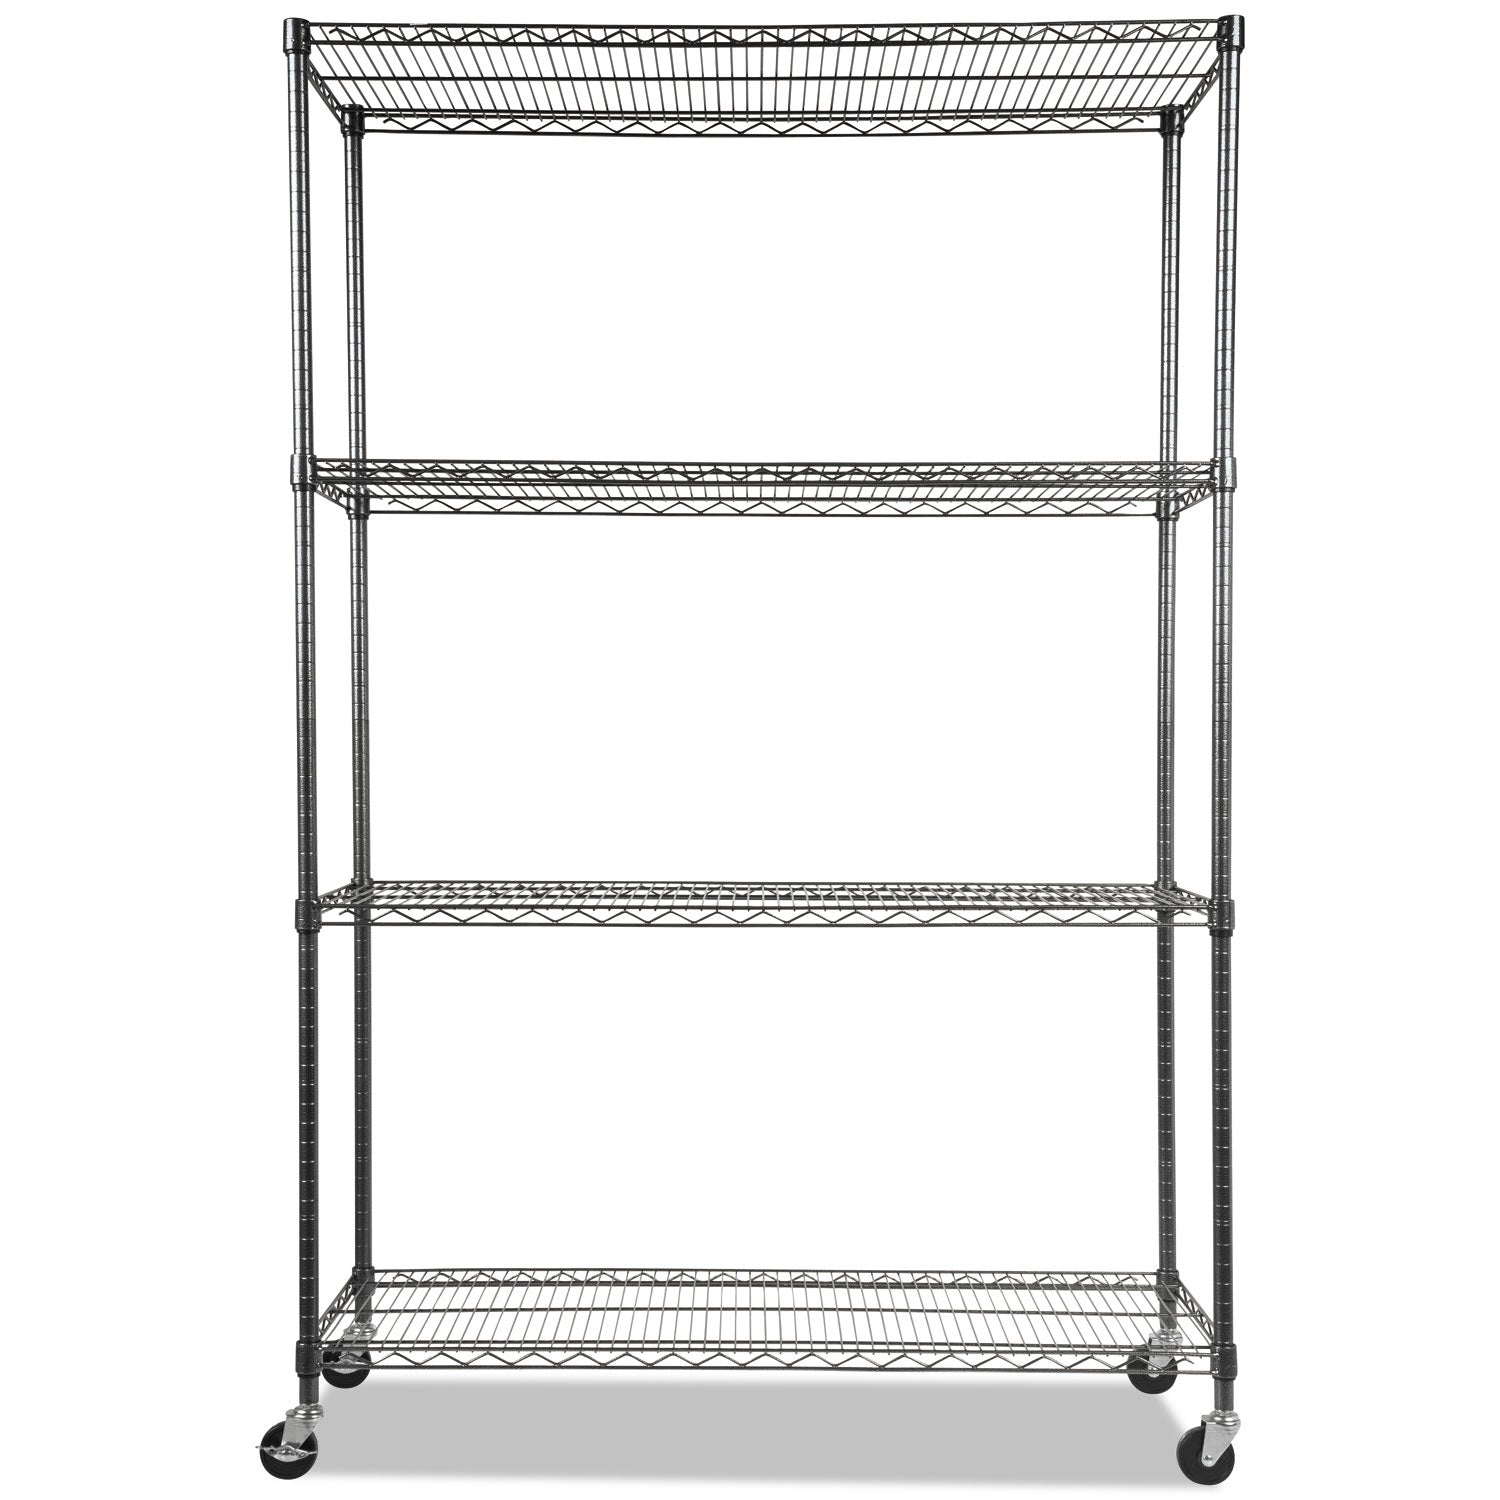 NSF Certified 4-Shelf Wire Shelving Kit with Casters, 48w x 18d x 72h, Black Anthracite - 